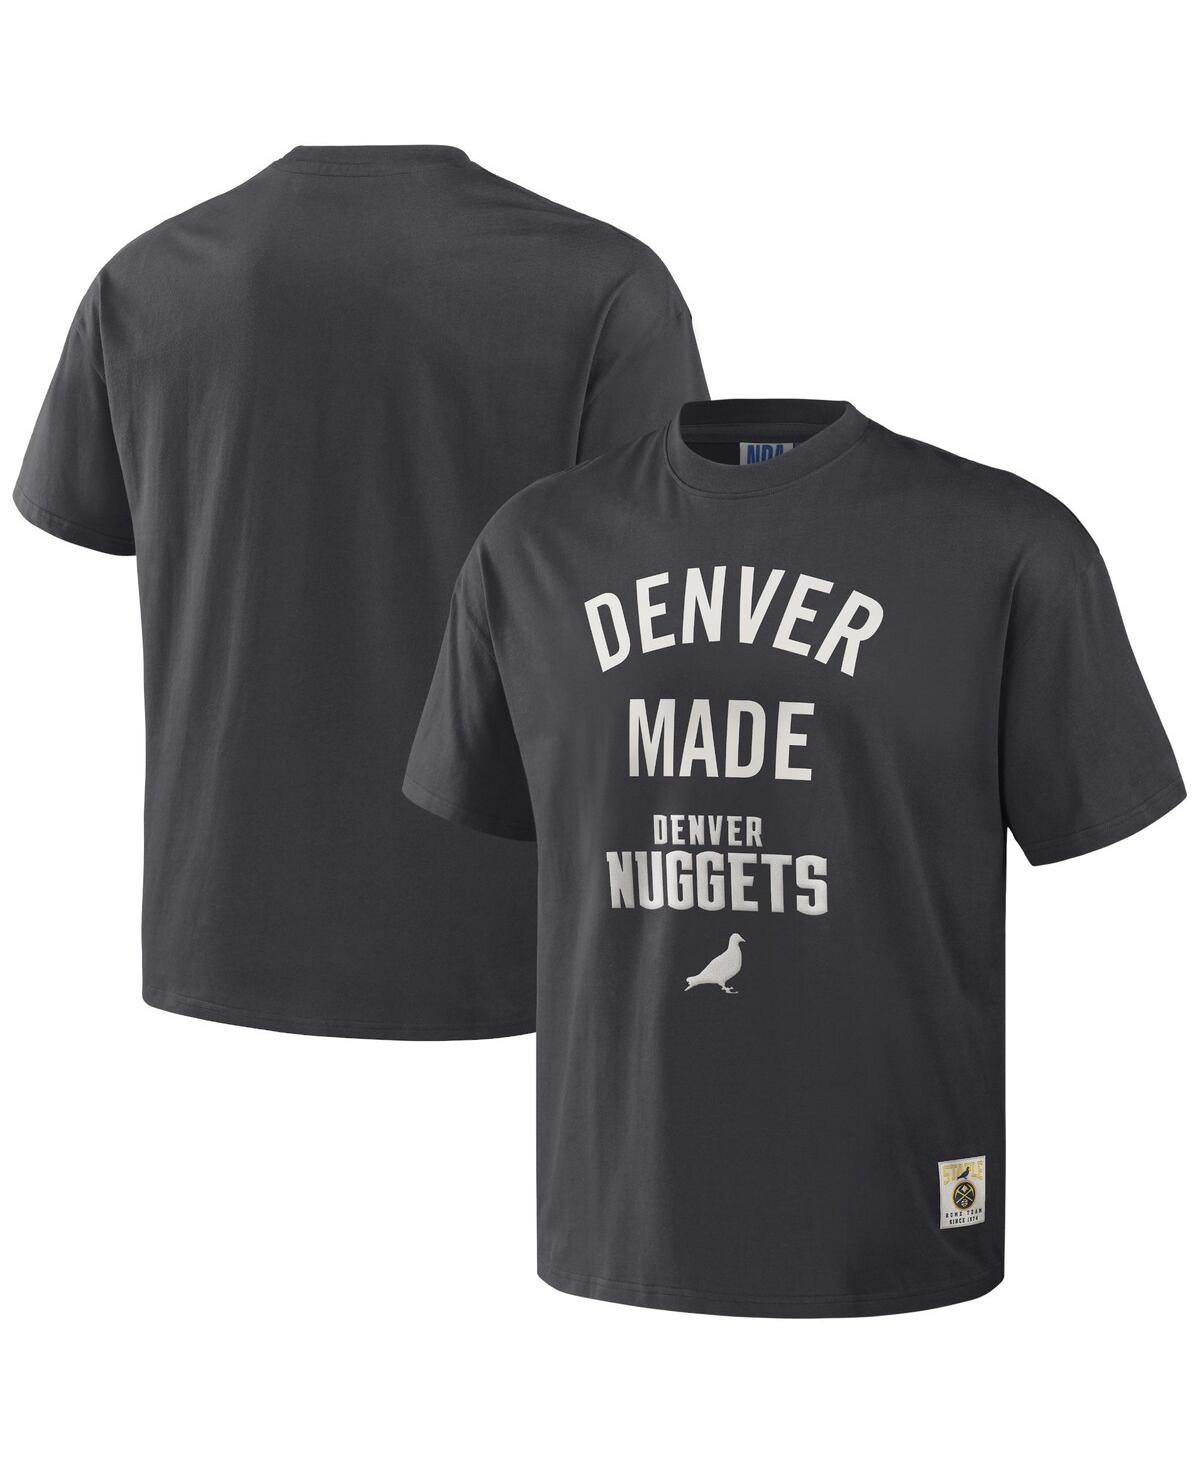 Men's Nba x Staple Anthracite Denver Nuggets Heavyweight Oversized T-shirt - Anthracite